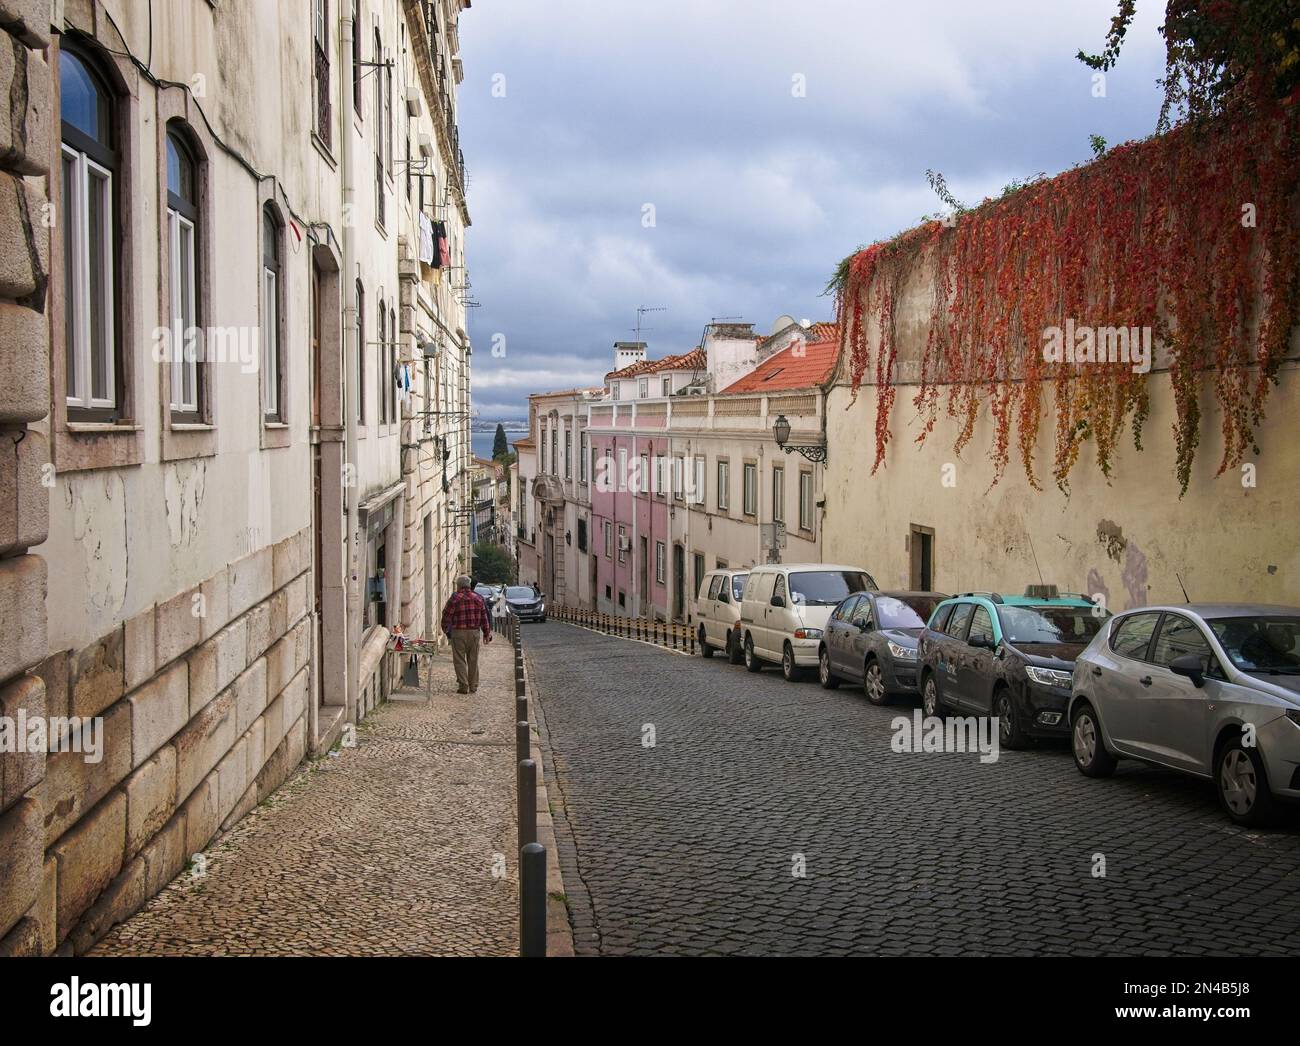 Narrow, curved, stone street on a hill descending to the Tagus River waterfront. Stock Photo